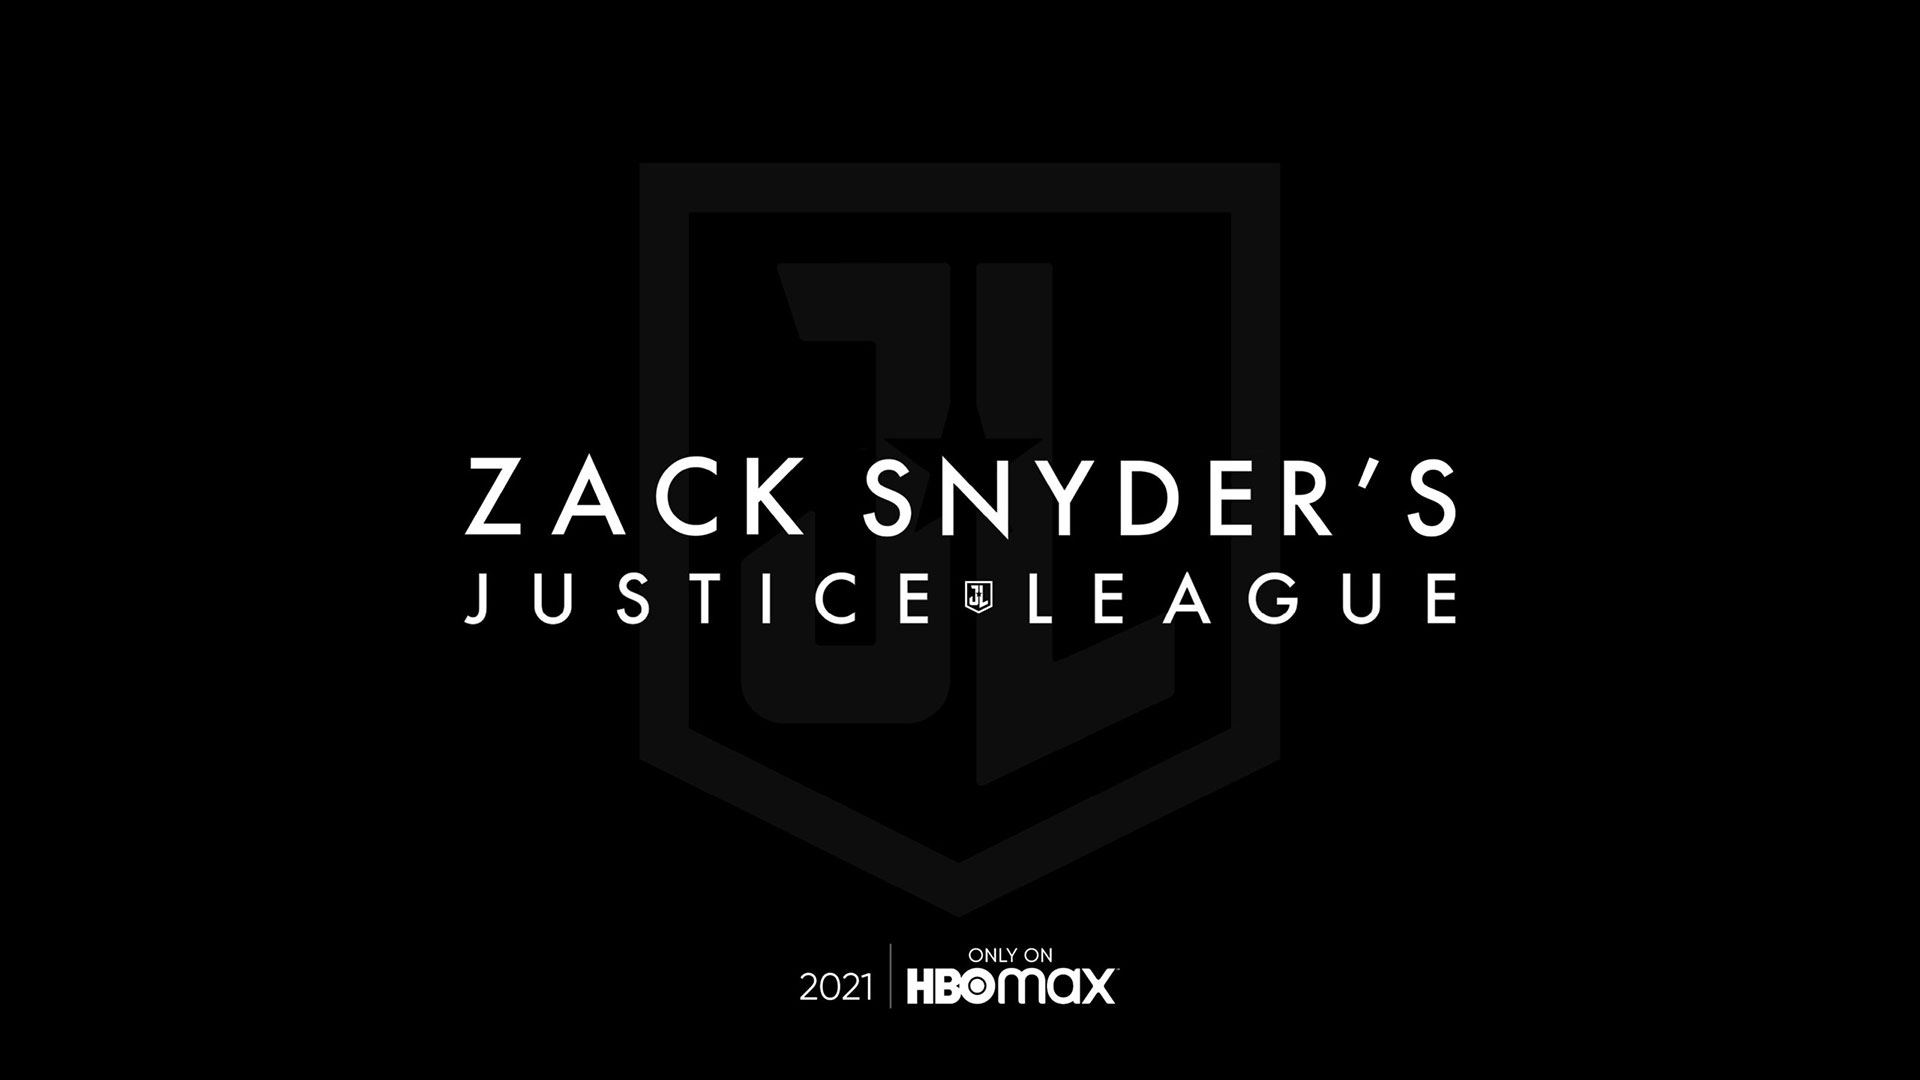 HD wallpaper Zack Snyder's Justice League review